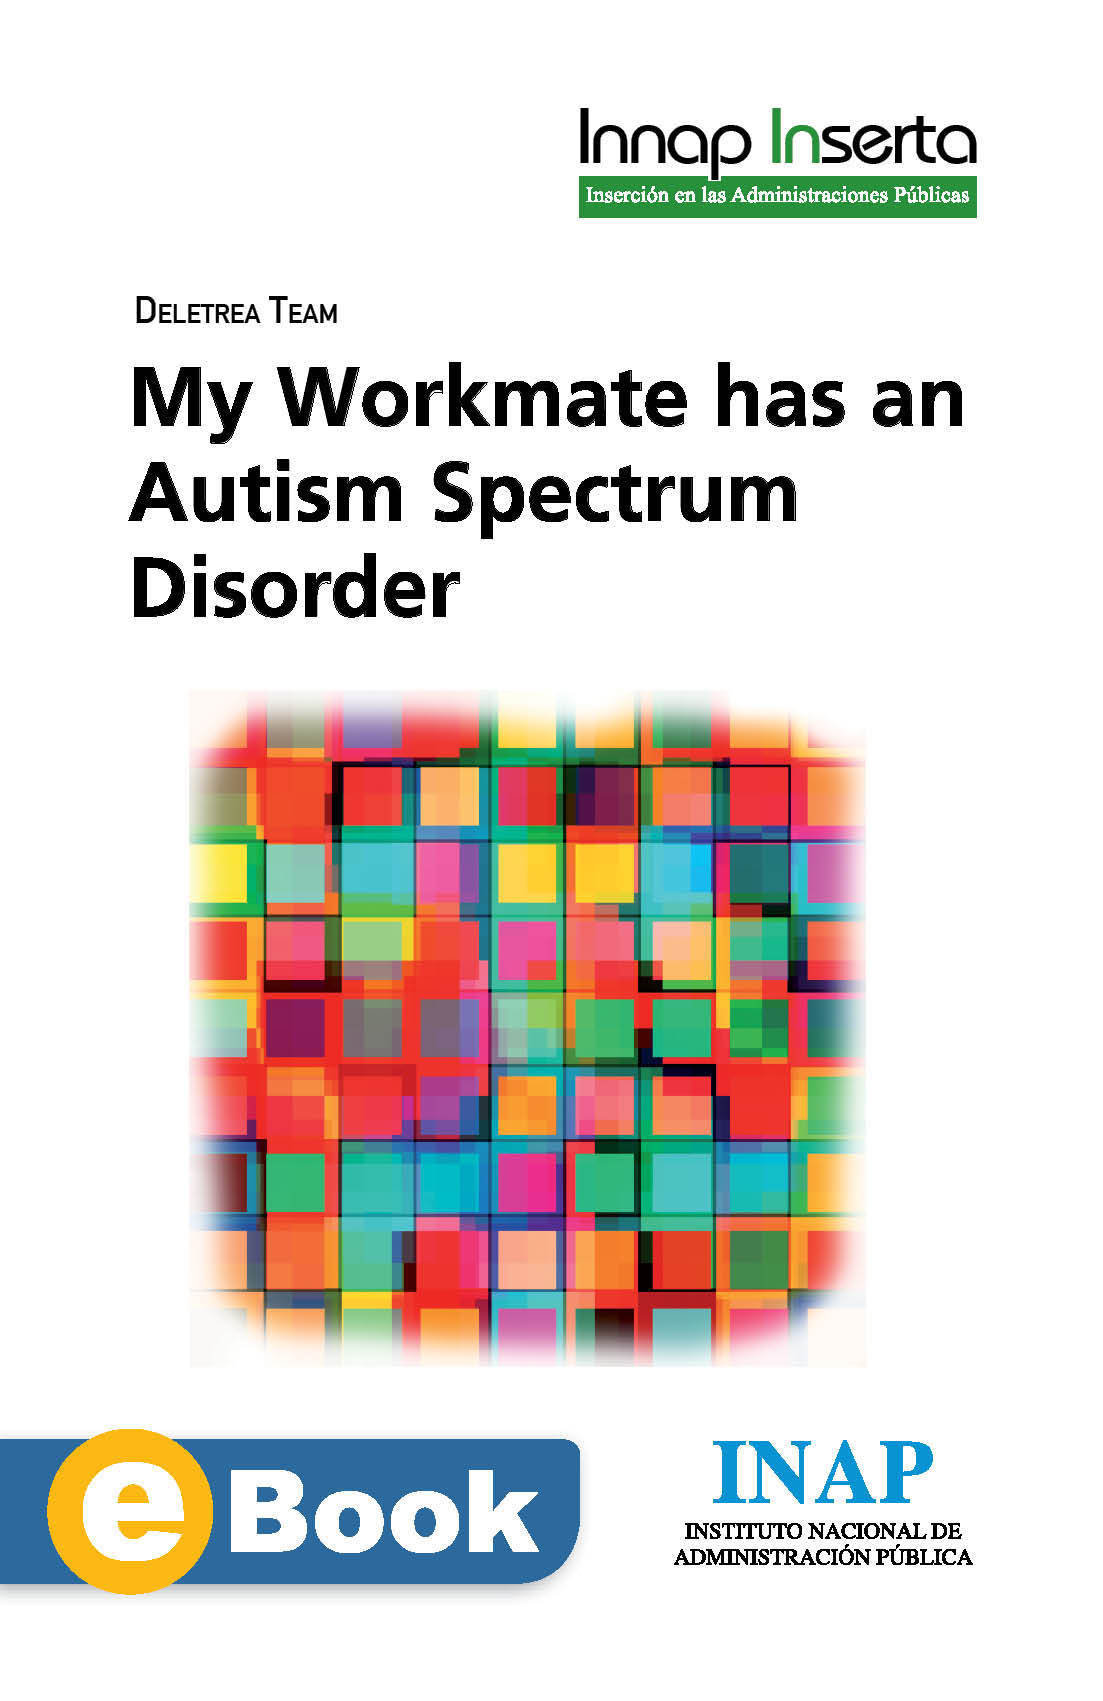 My Workmate has an Autism Spectrum Disorder